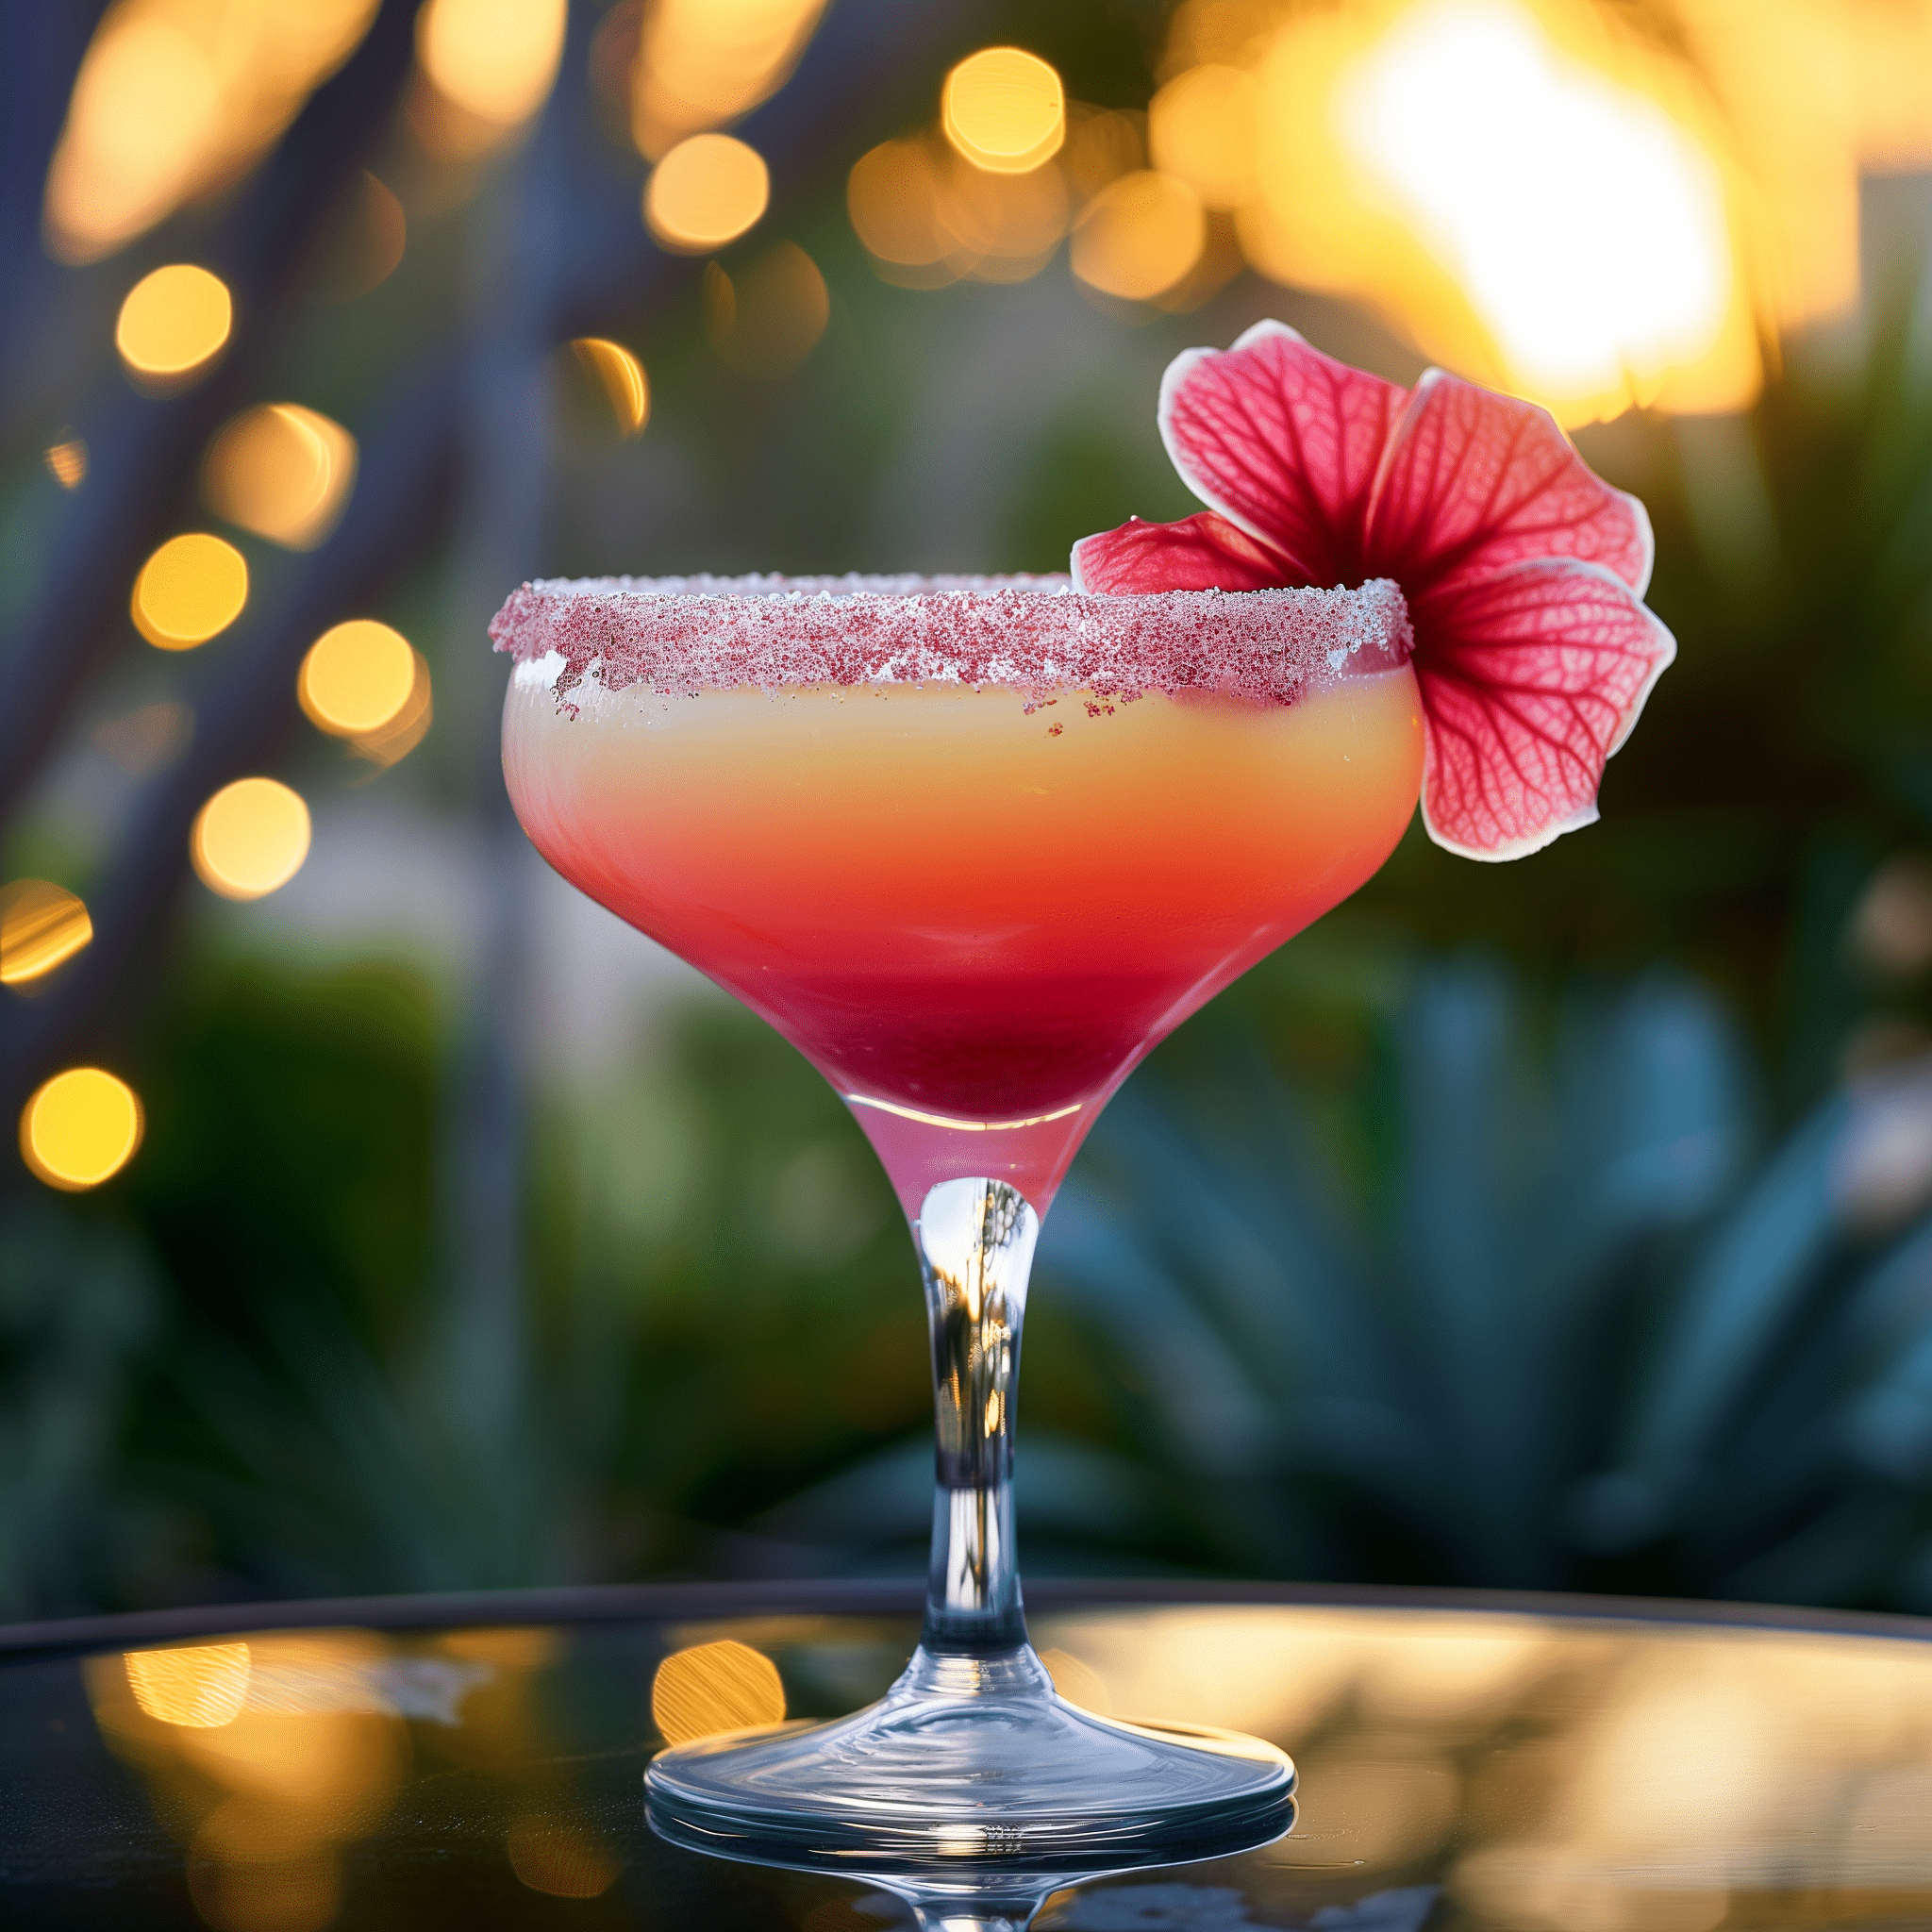 Grapefruit Hibiscus Margarita Cocktail Recipe - This cocktail offers a delightful balance of sweet and tart with a floral undertone. The grapefruit provides a juicy, tangy kick, while the hibiscus adds a subtle, aromatic sweetness. The tequila grounds the drink with its earthy warmth, making it complex and inviting.